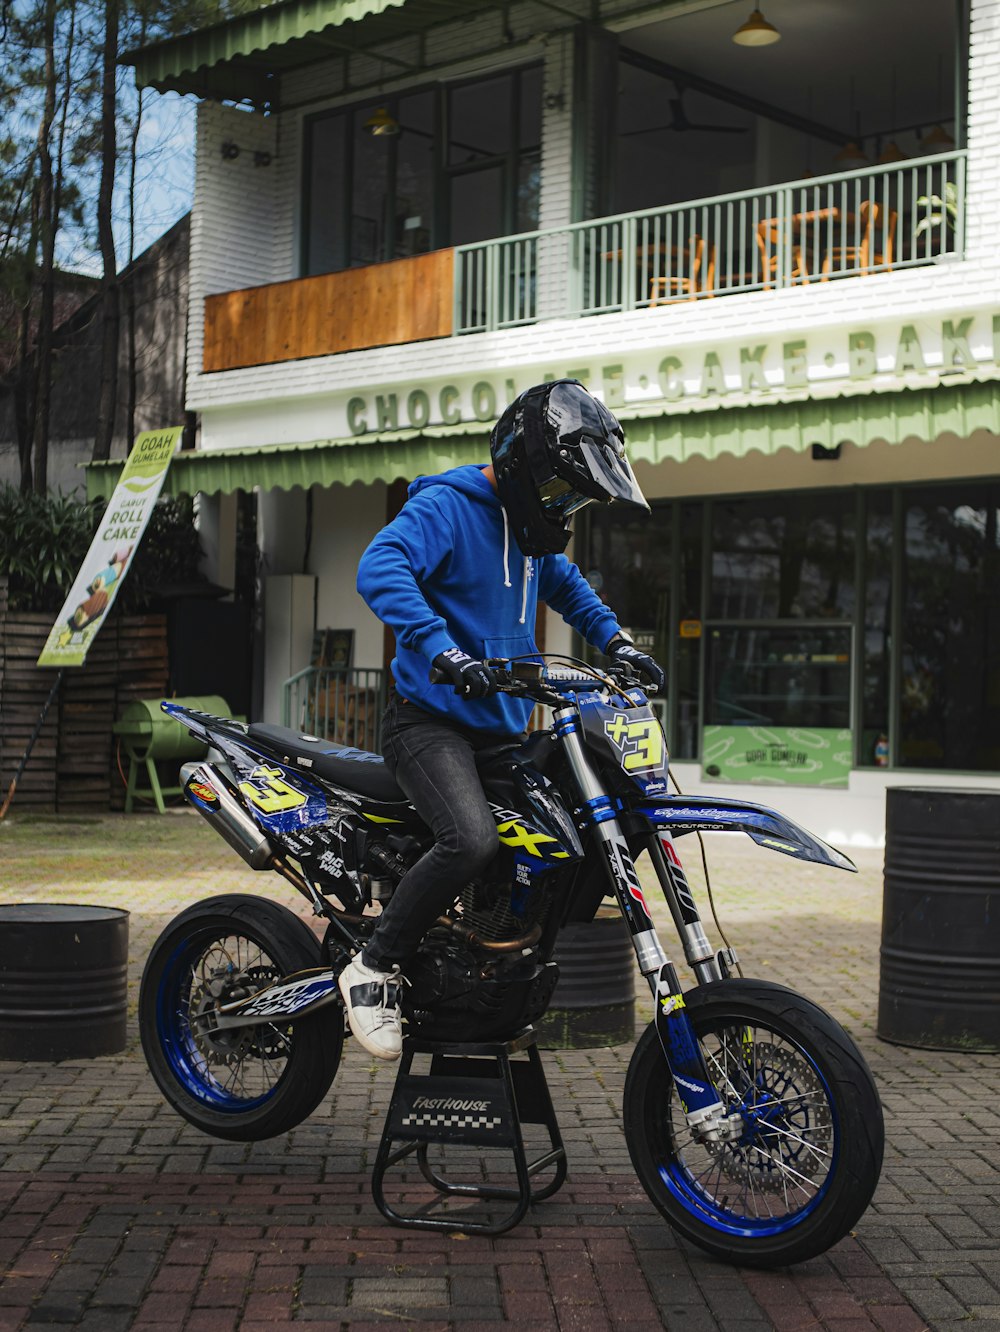 a person on a dirt bike in front of a building